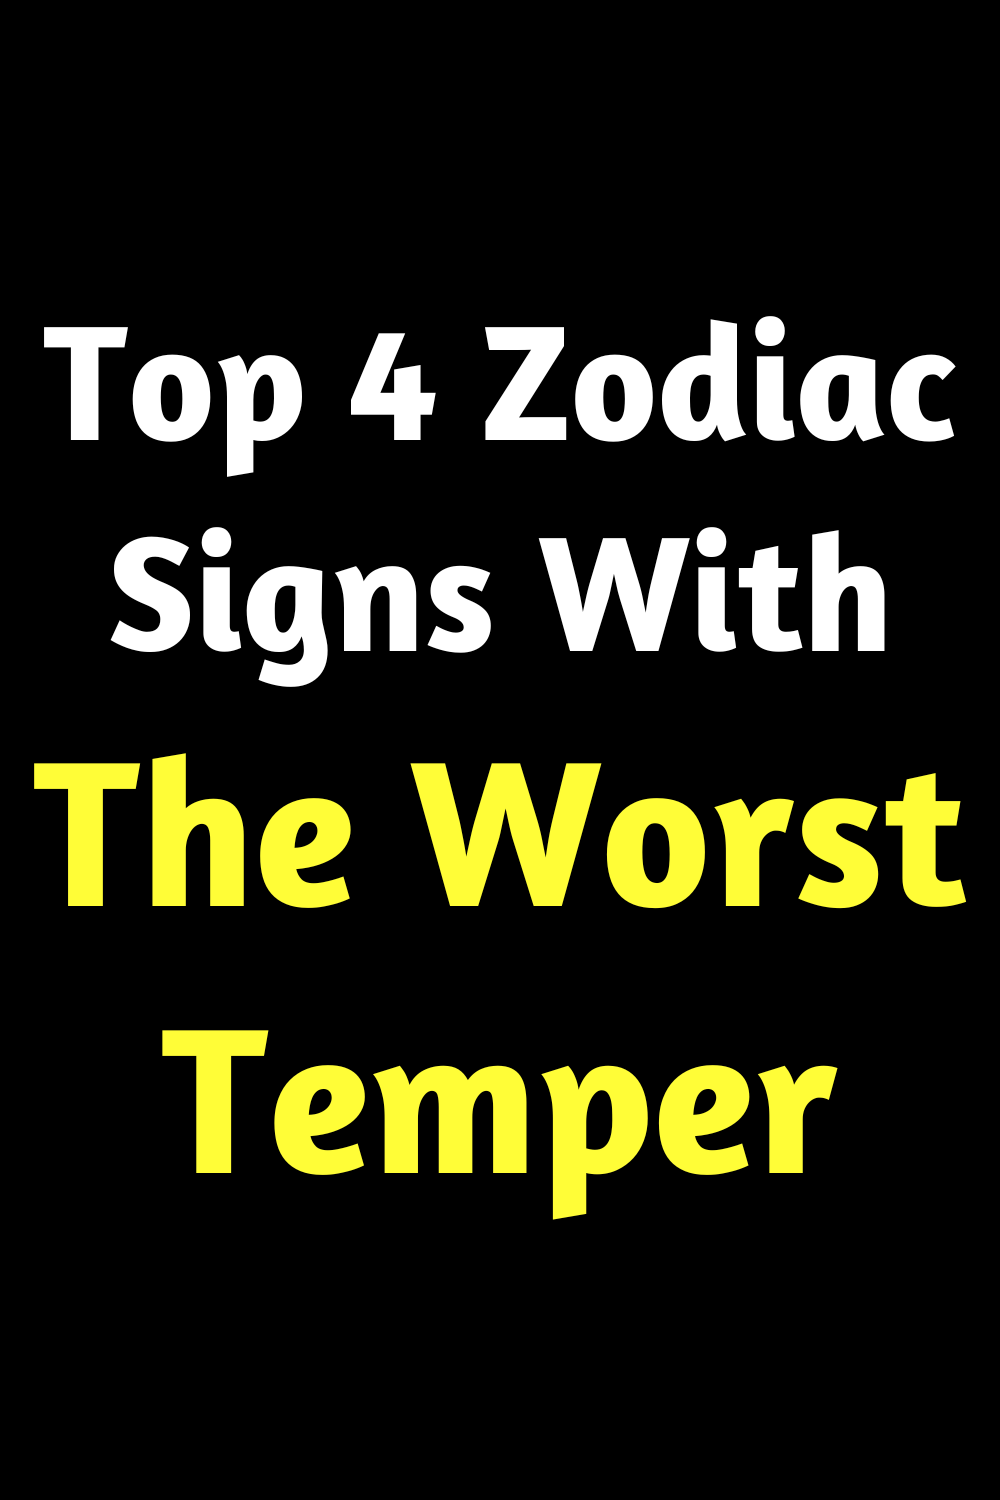 Top 4 Zodiac Signs With The Worst Temper